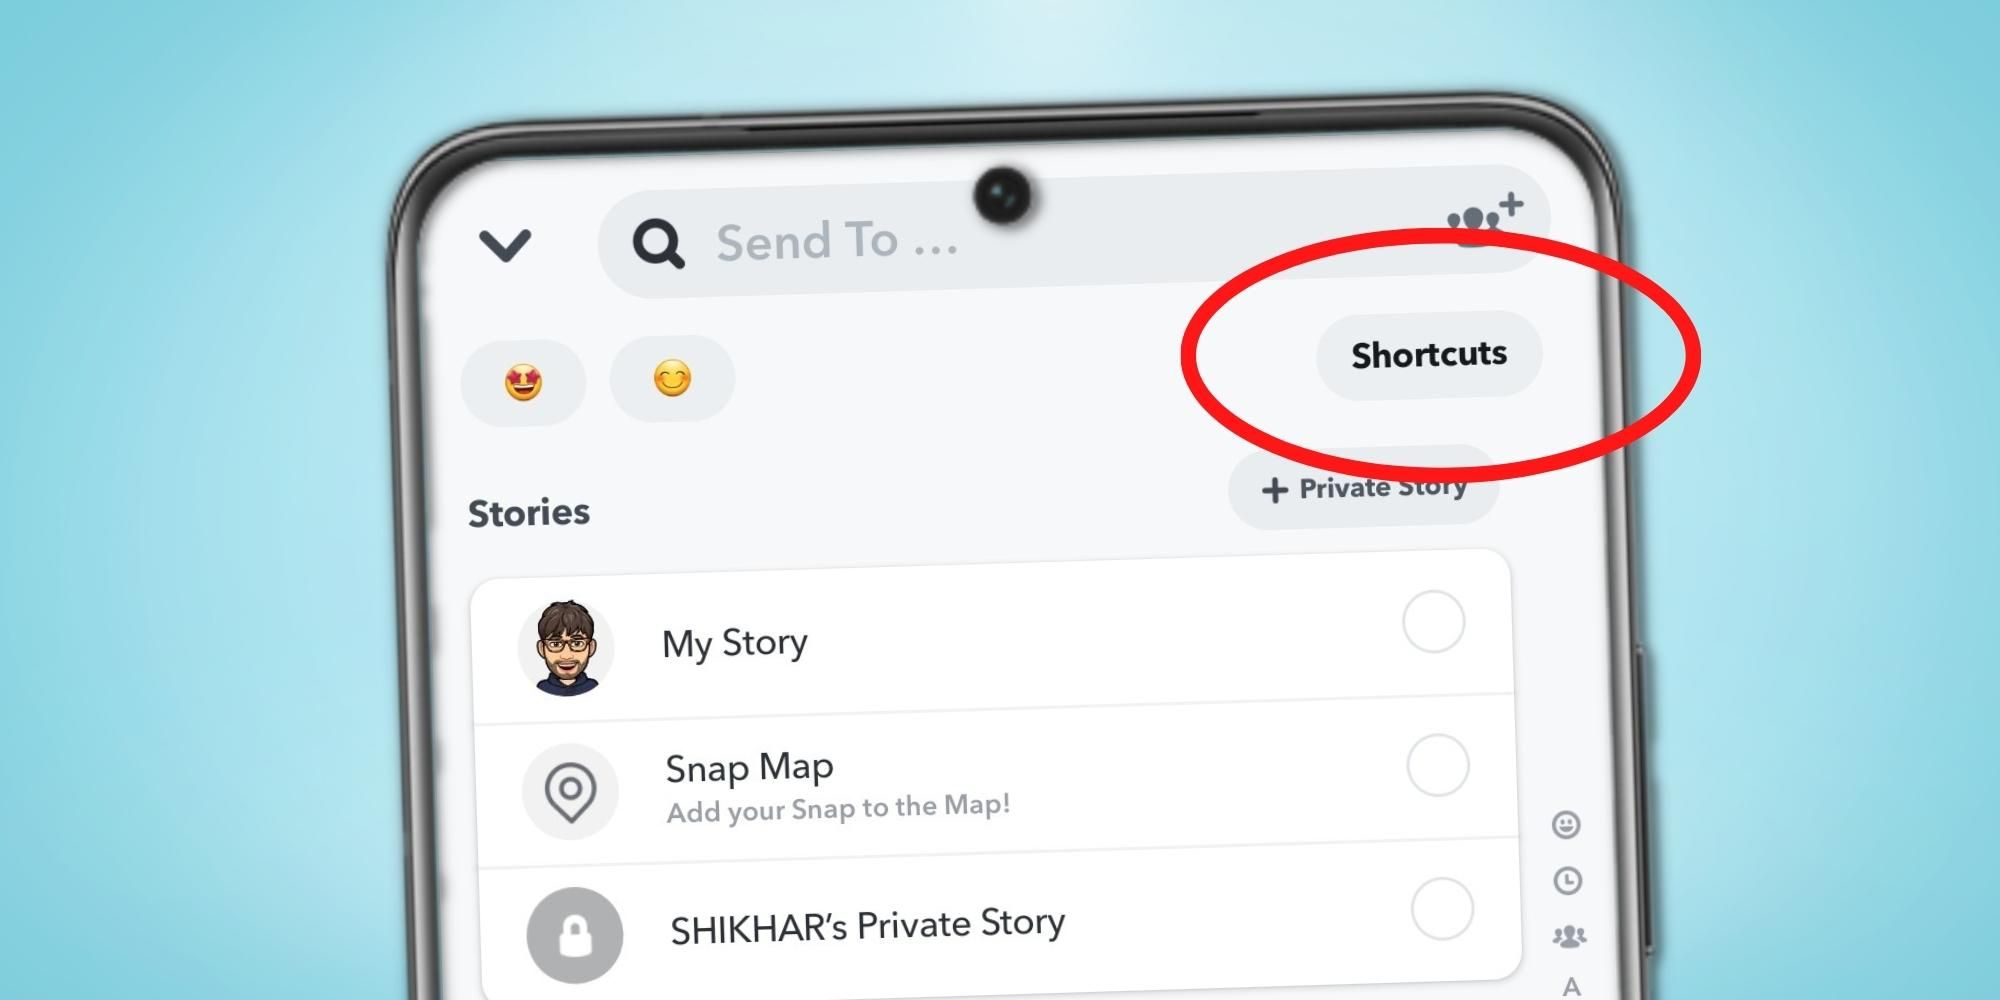 How To Create Shortcuts On Snapchat For Friends & Groups